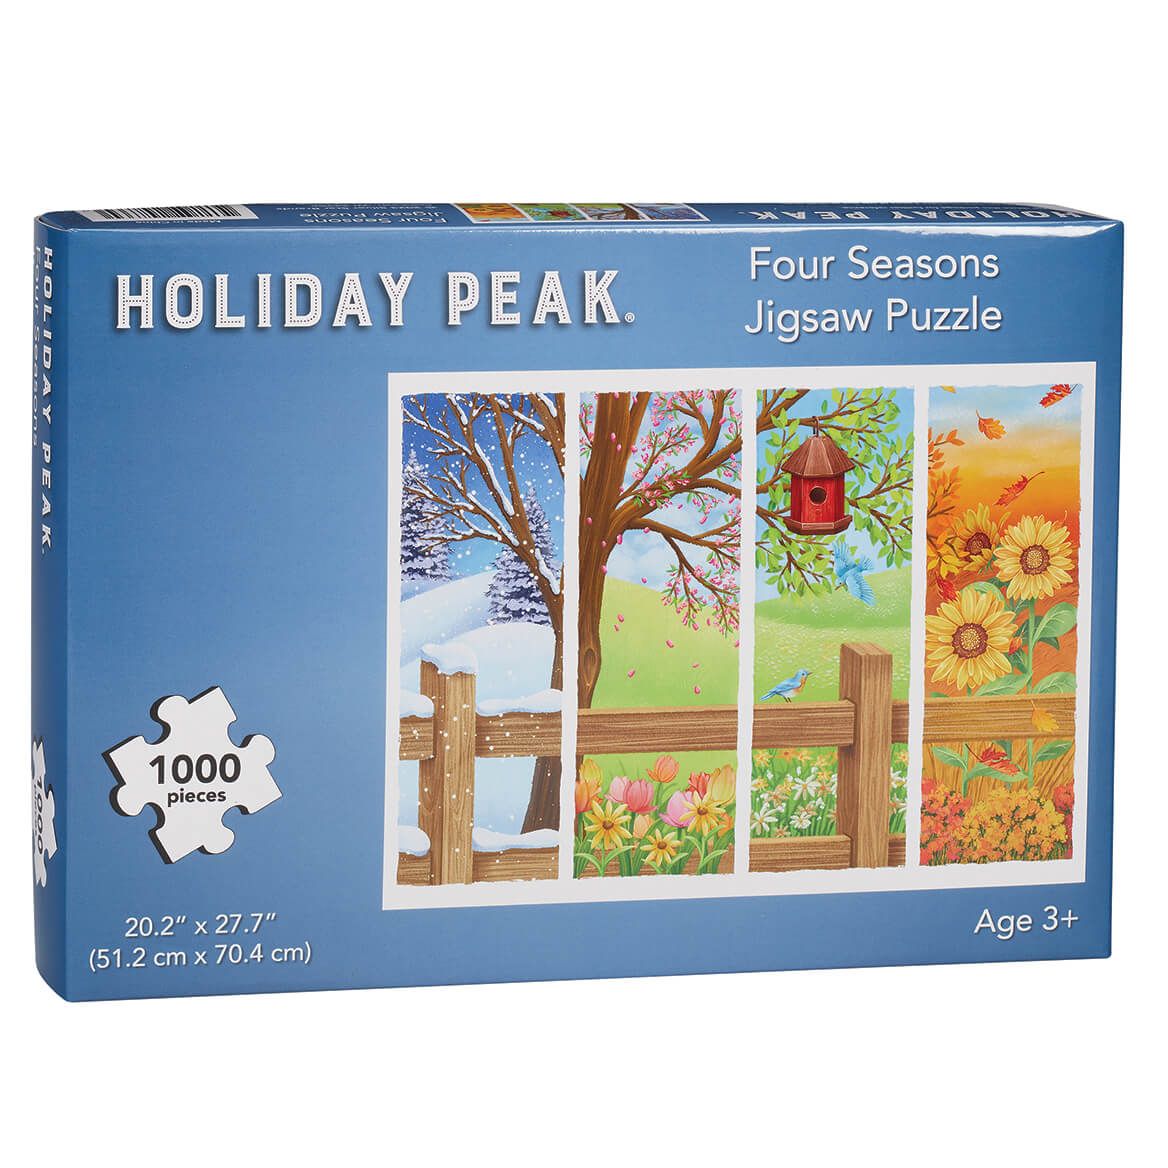 Four Seasons Puzzle By Holiday Peak™ + '-' + 375736